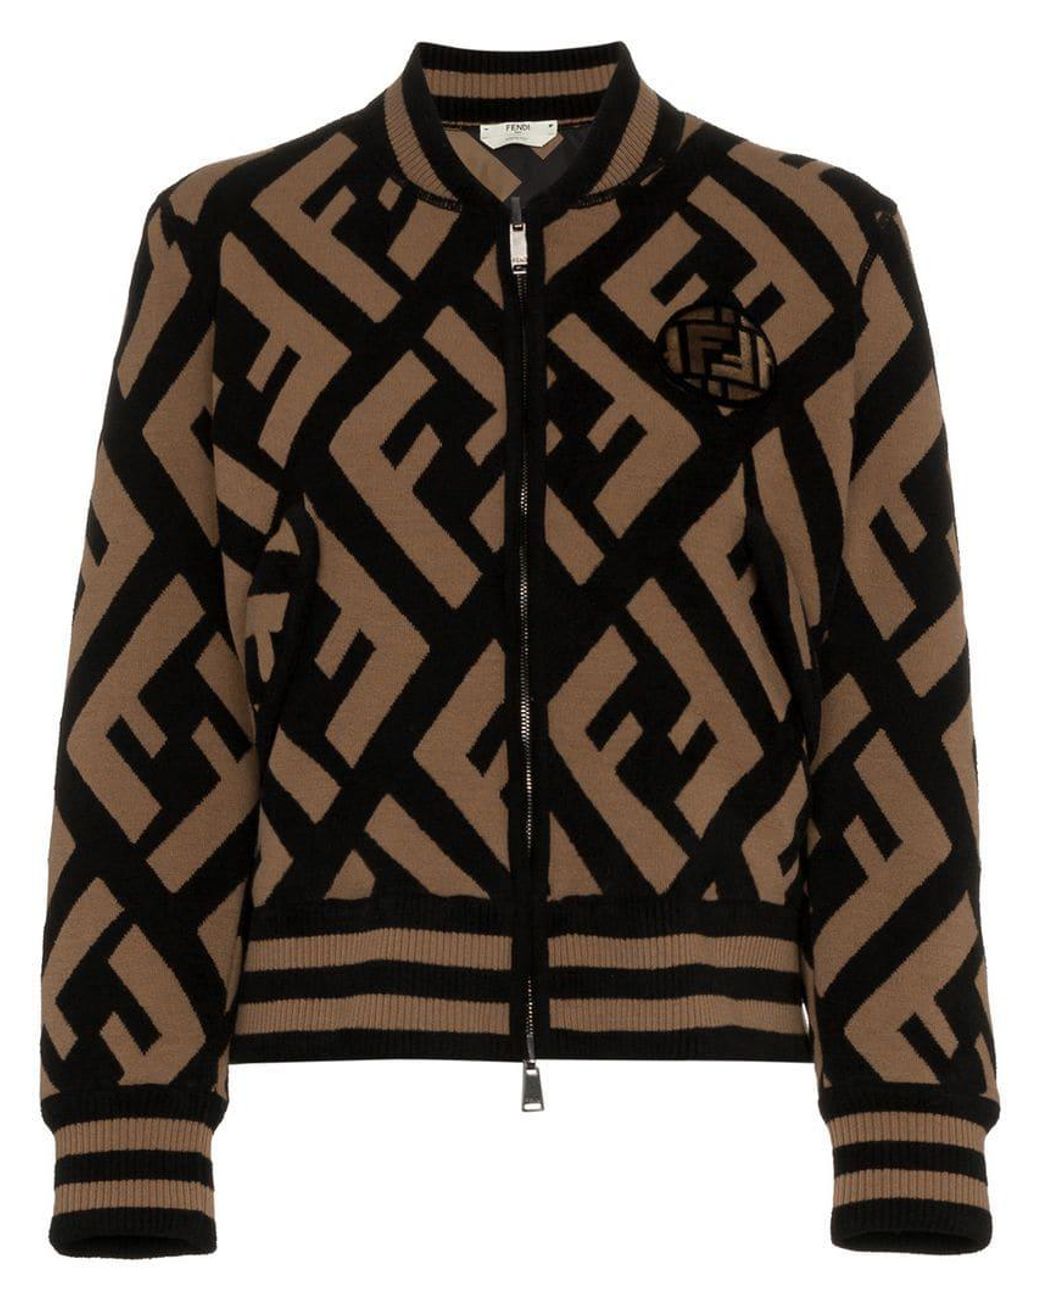 Fendi Synthetic Ff Logo Knitted Bomber Jacket in Black | Lyst Canada